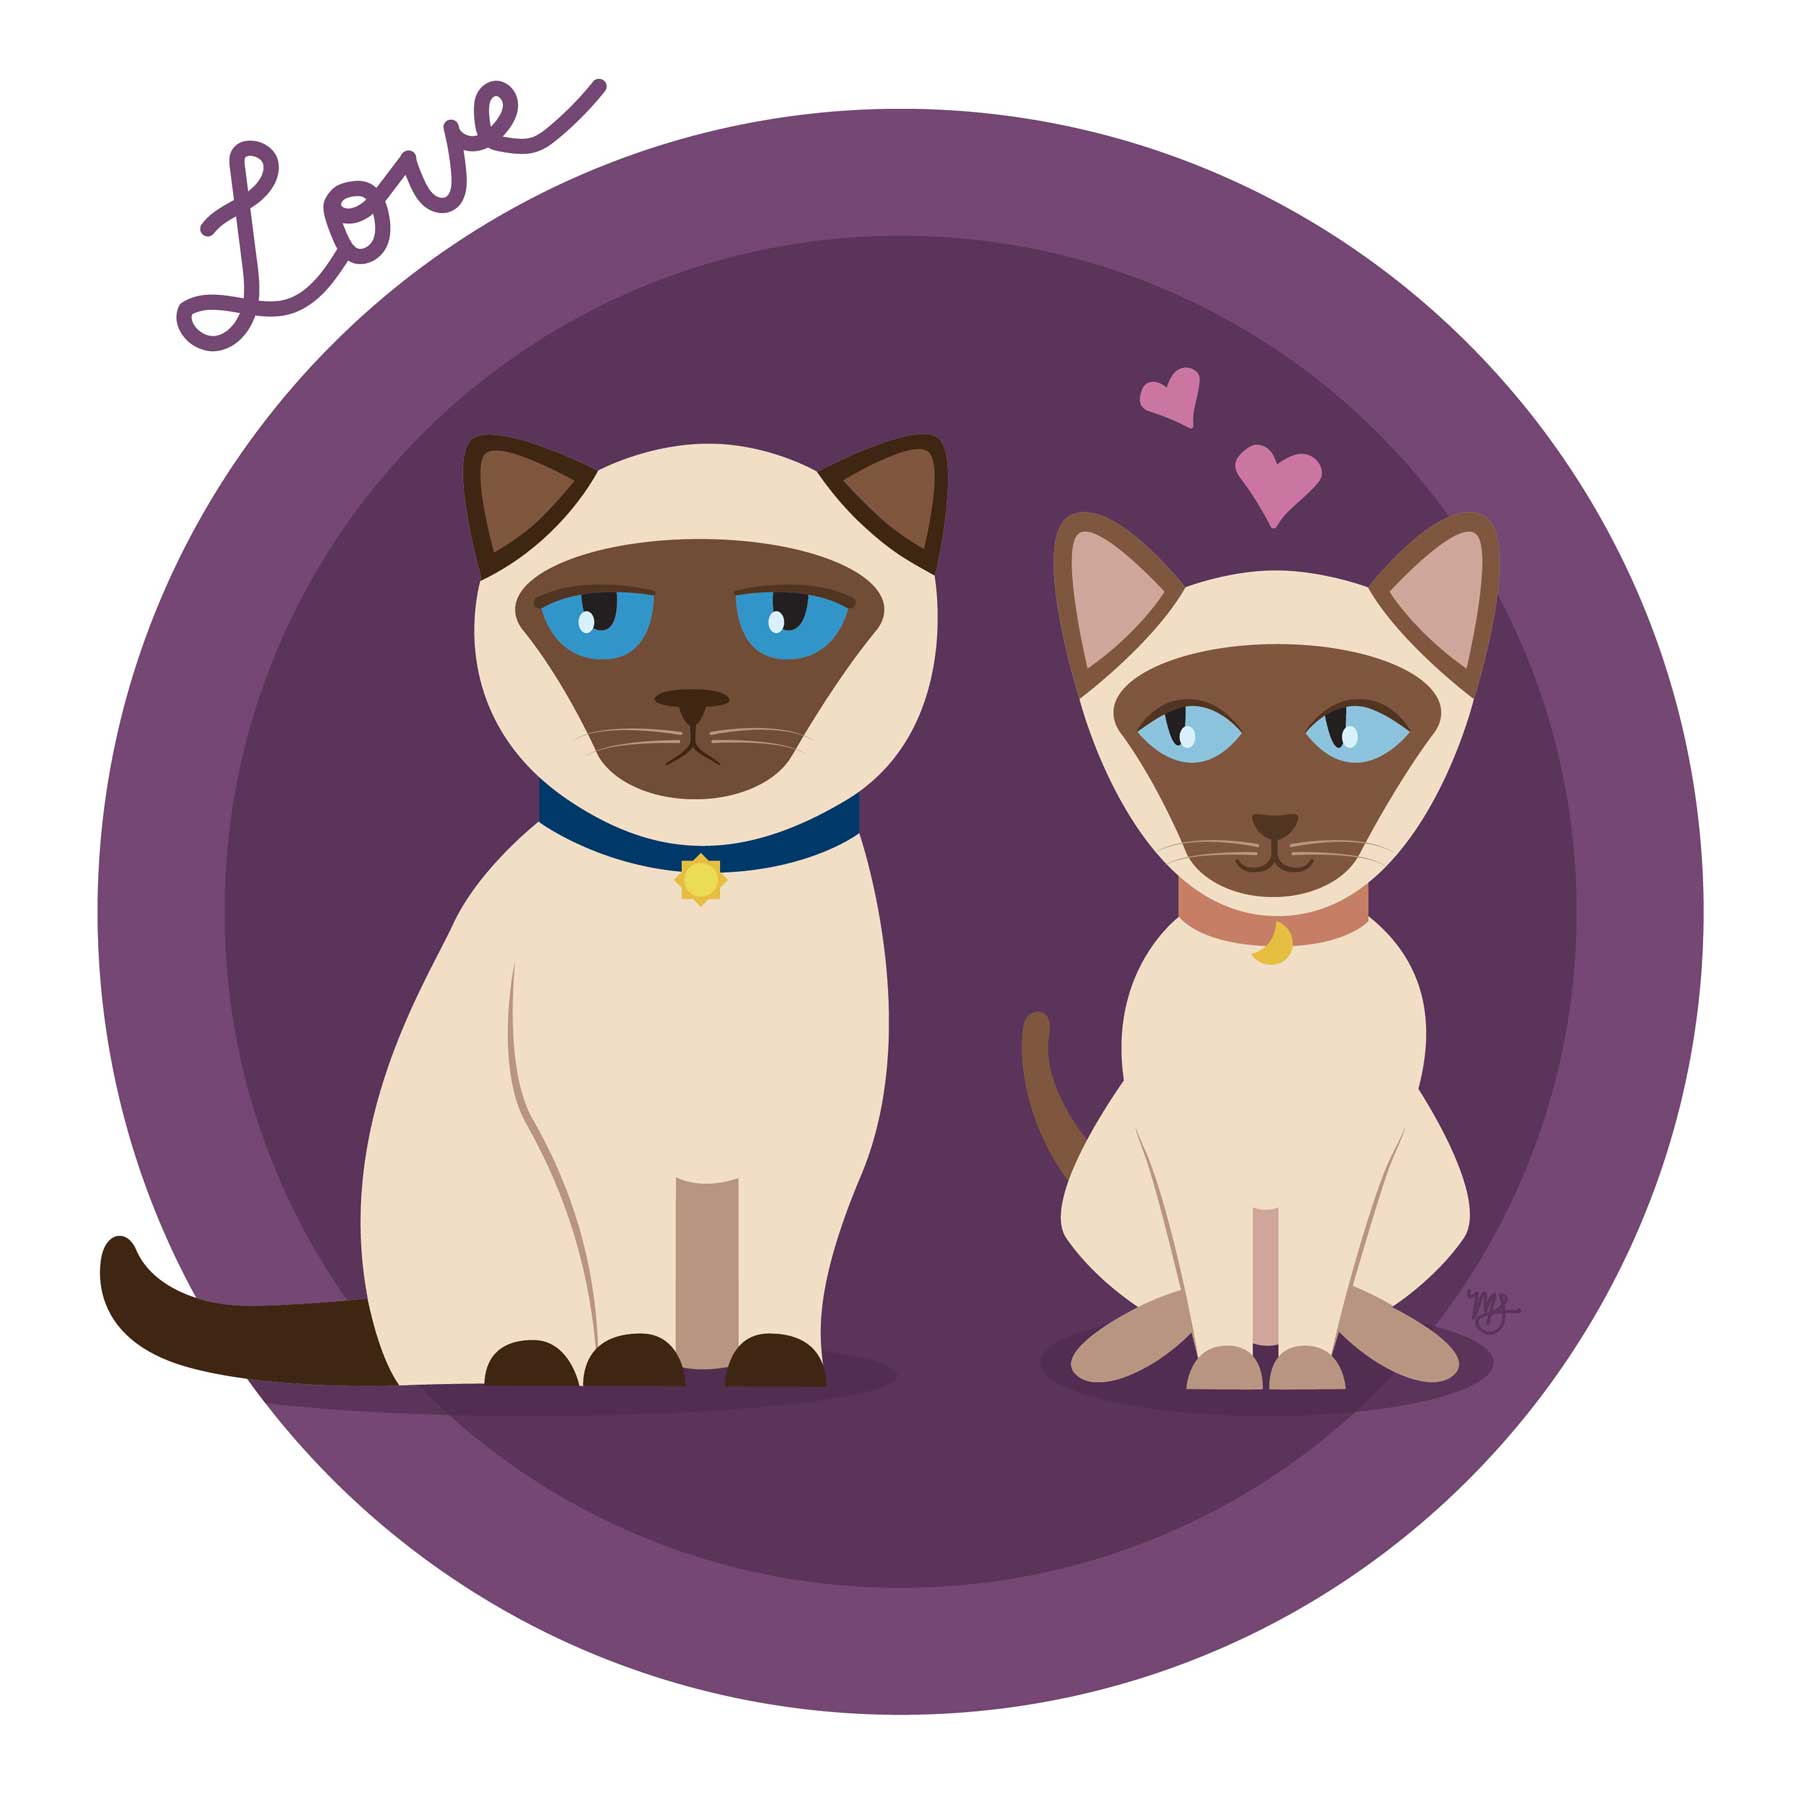 This is an image of two illustrated siamese cats